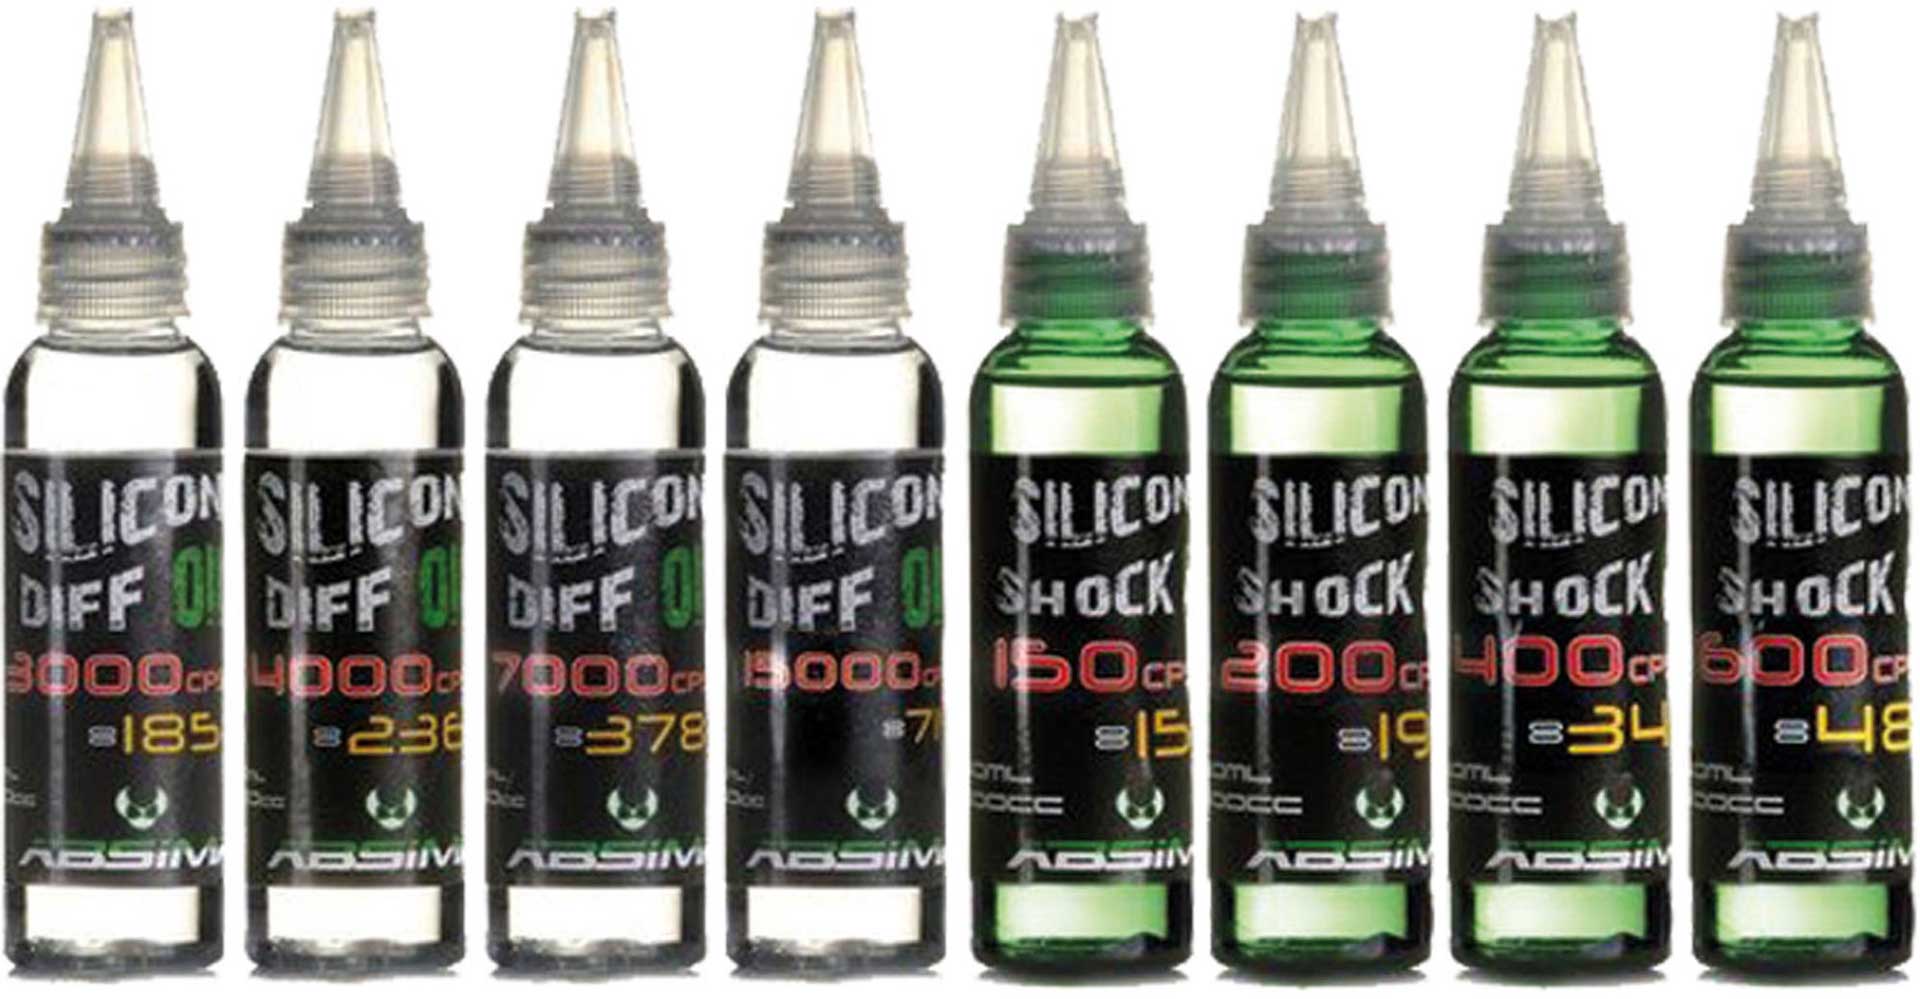 ABSIMA SILICONE DIFFERENTIAL OIL 150000CPS 60ML